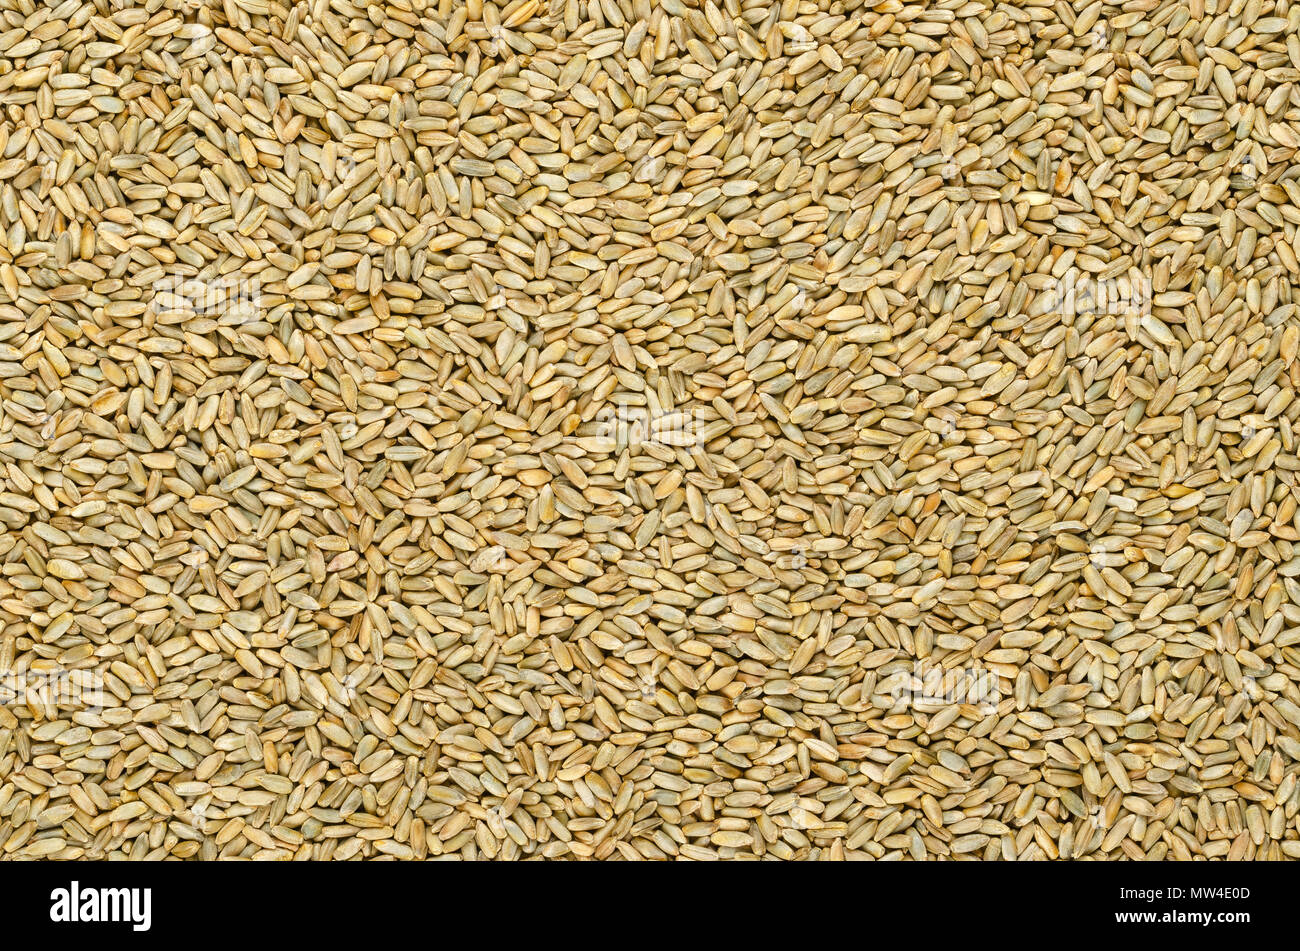 Rye grains, surface and background. Secale cereale, grain, cover and forage crop. Member of wheat tribe. Used for flour, bread, beer, whiskey, ... Stock Photo